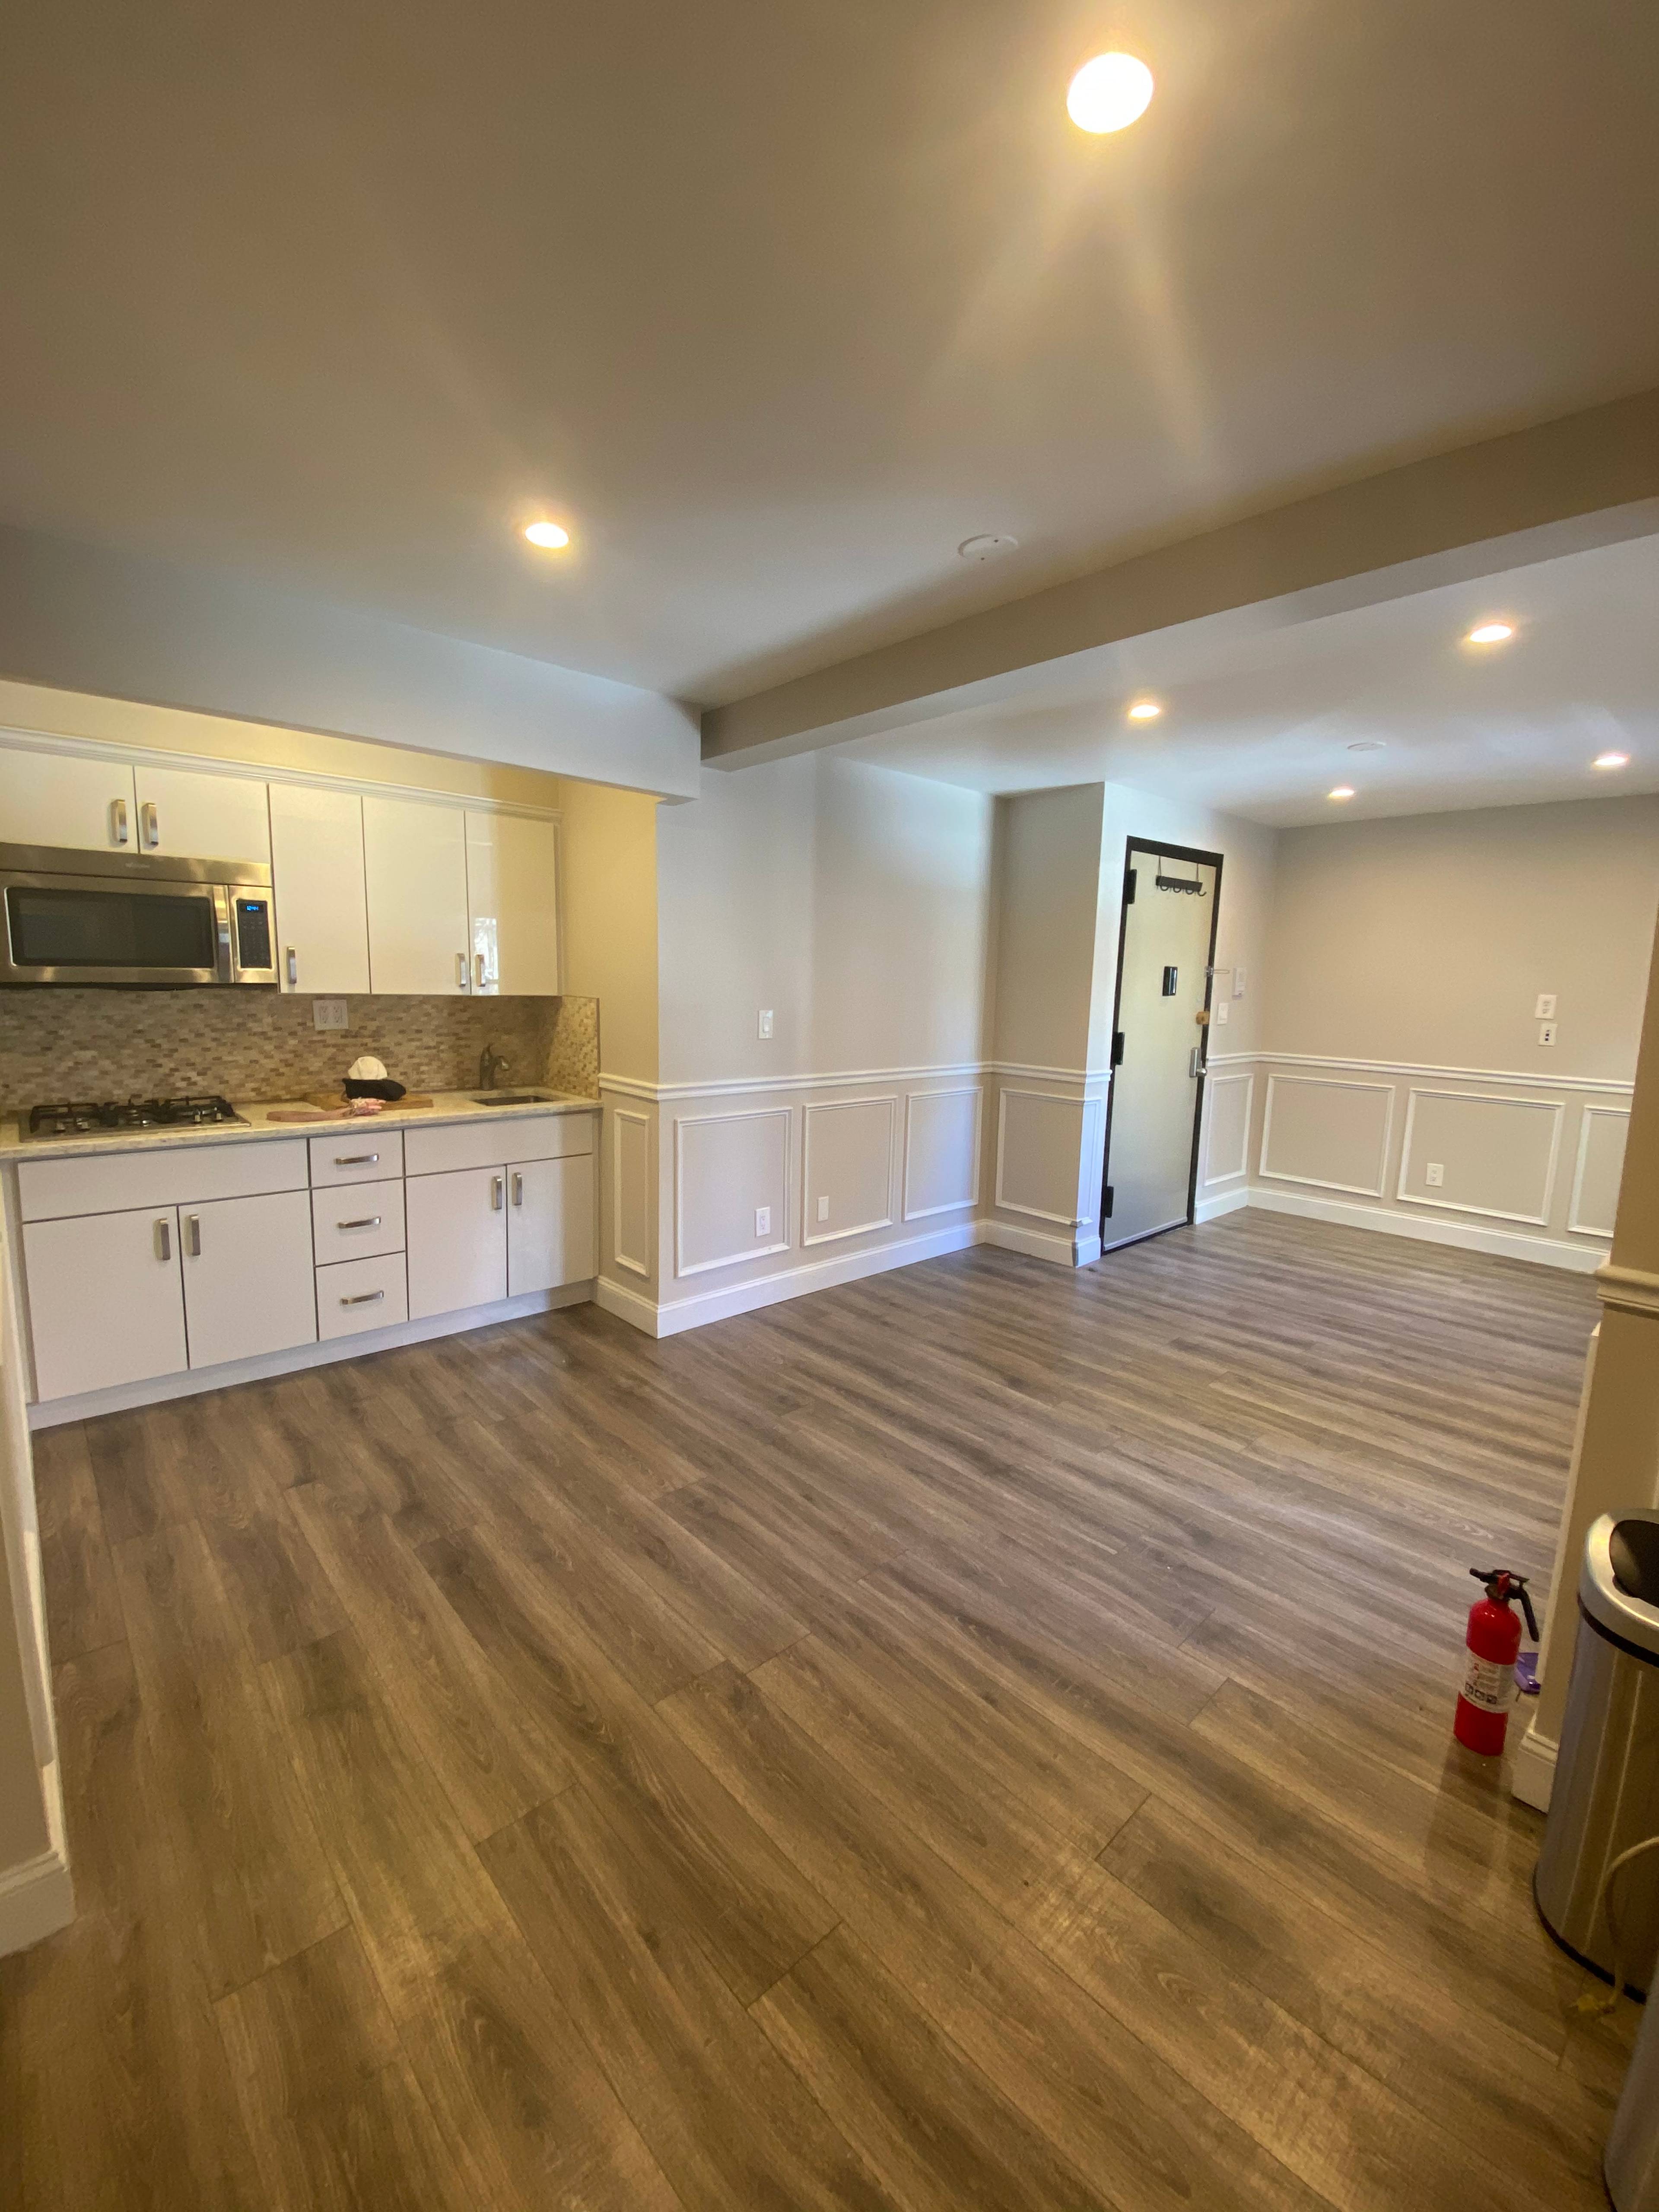 X Large One Bed One Bath Southwest Exposure Total renovated unit Open Kitchen Two window A C in unit Near the new 14 screen Regal theater, The Essex Market, also ...